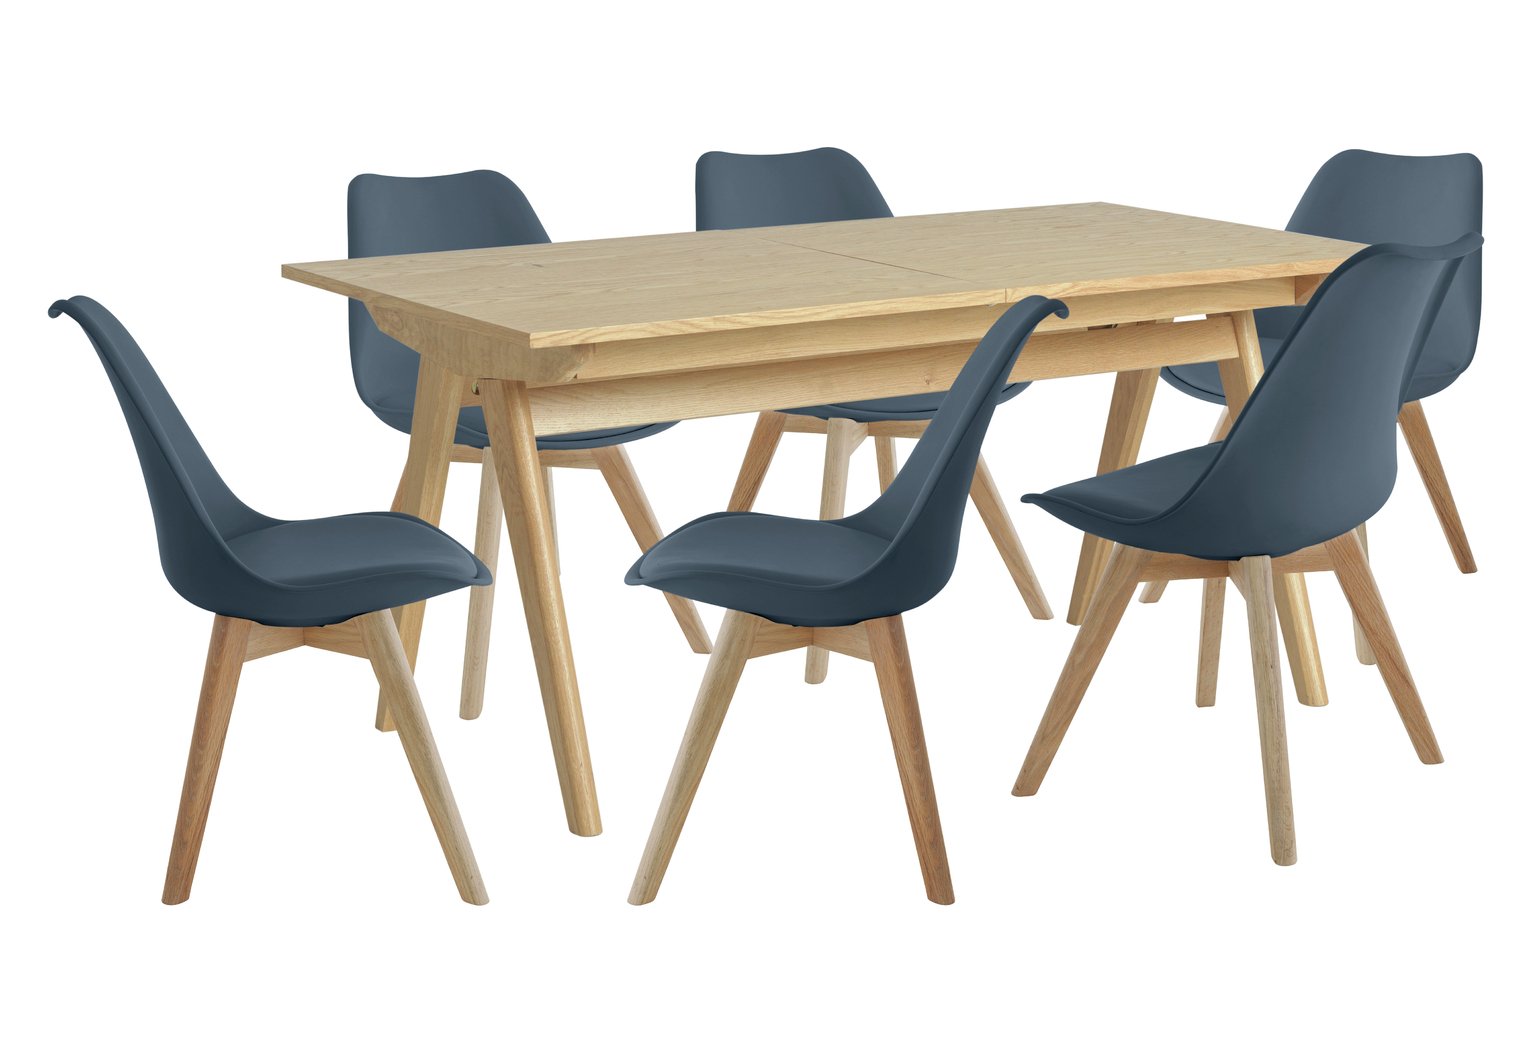 Habitat Jerry Wood Effect Dining Table & 6 Navy Blue Chairs